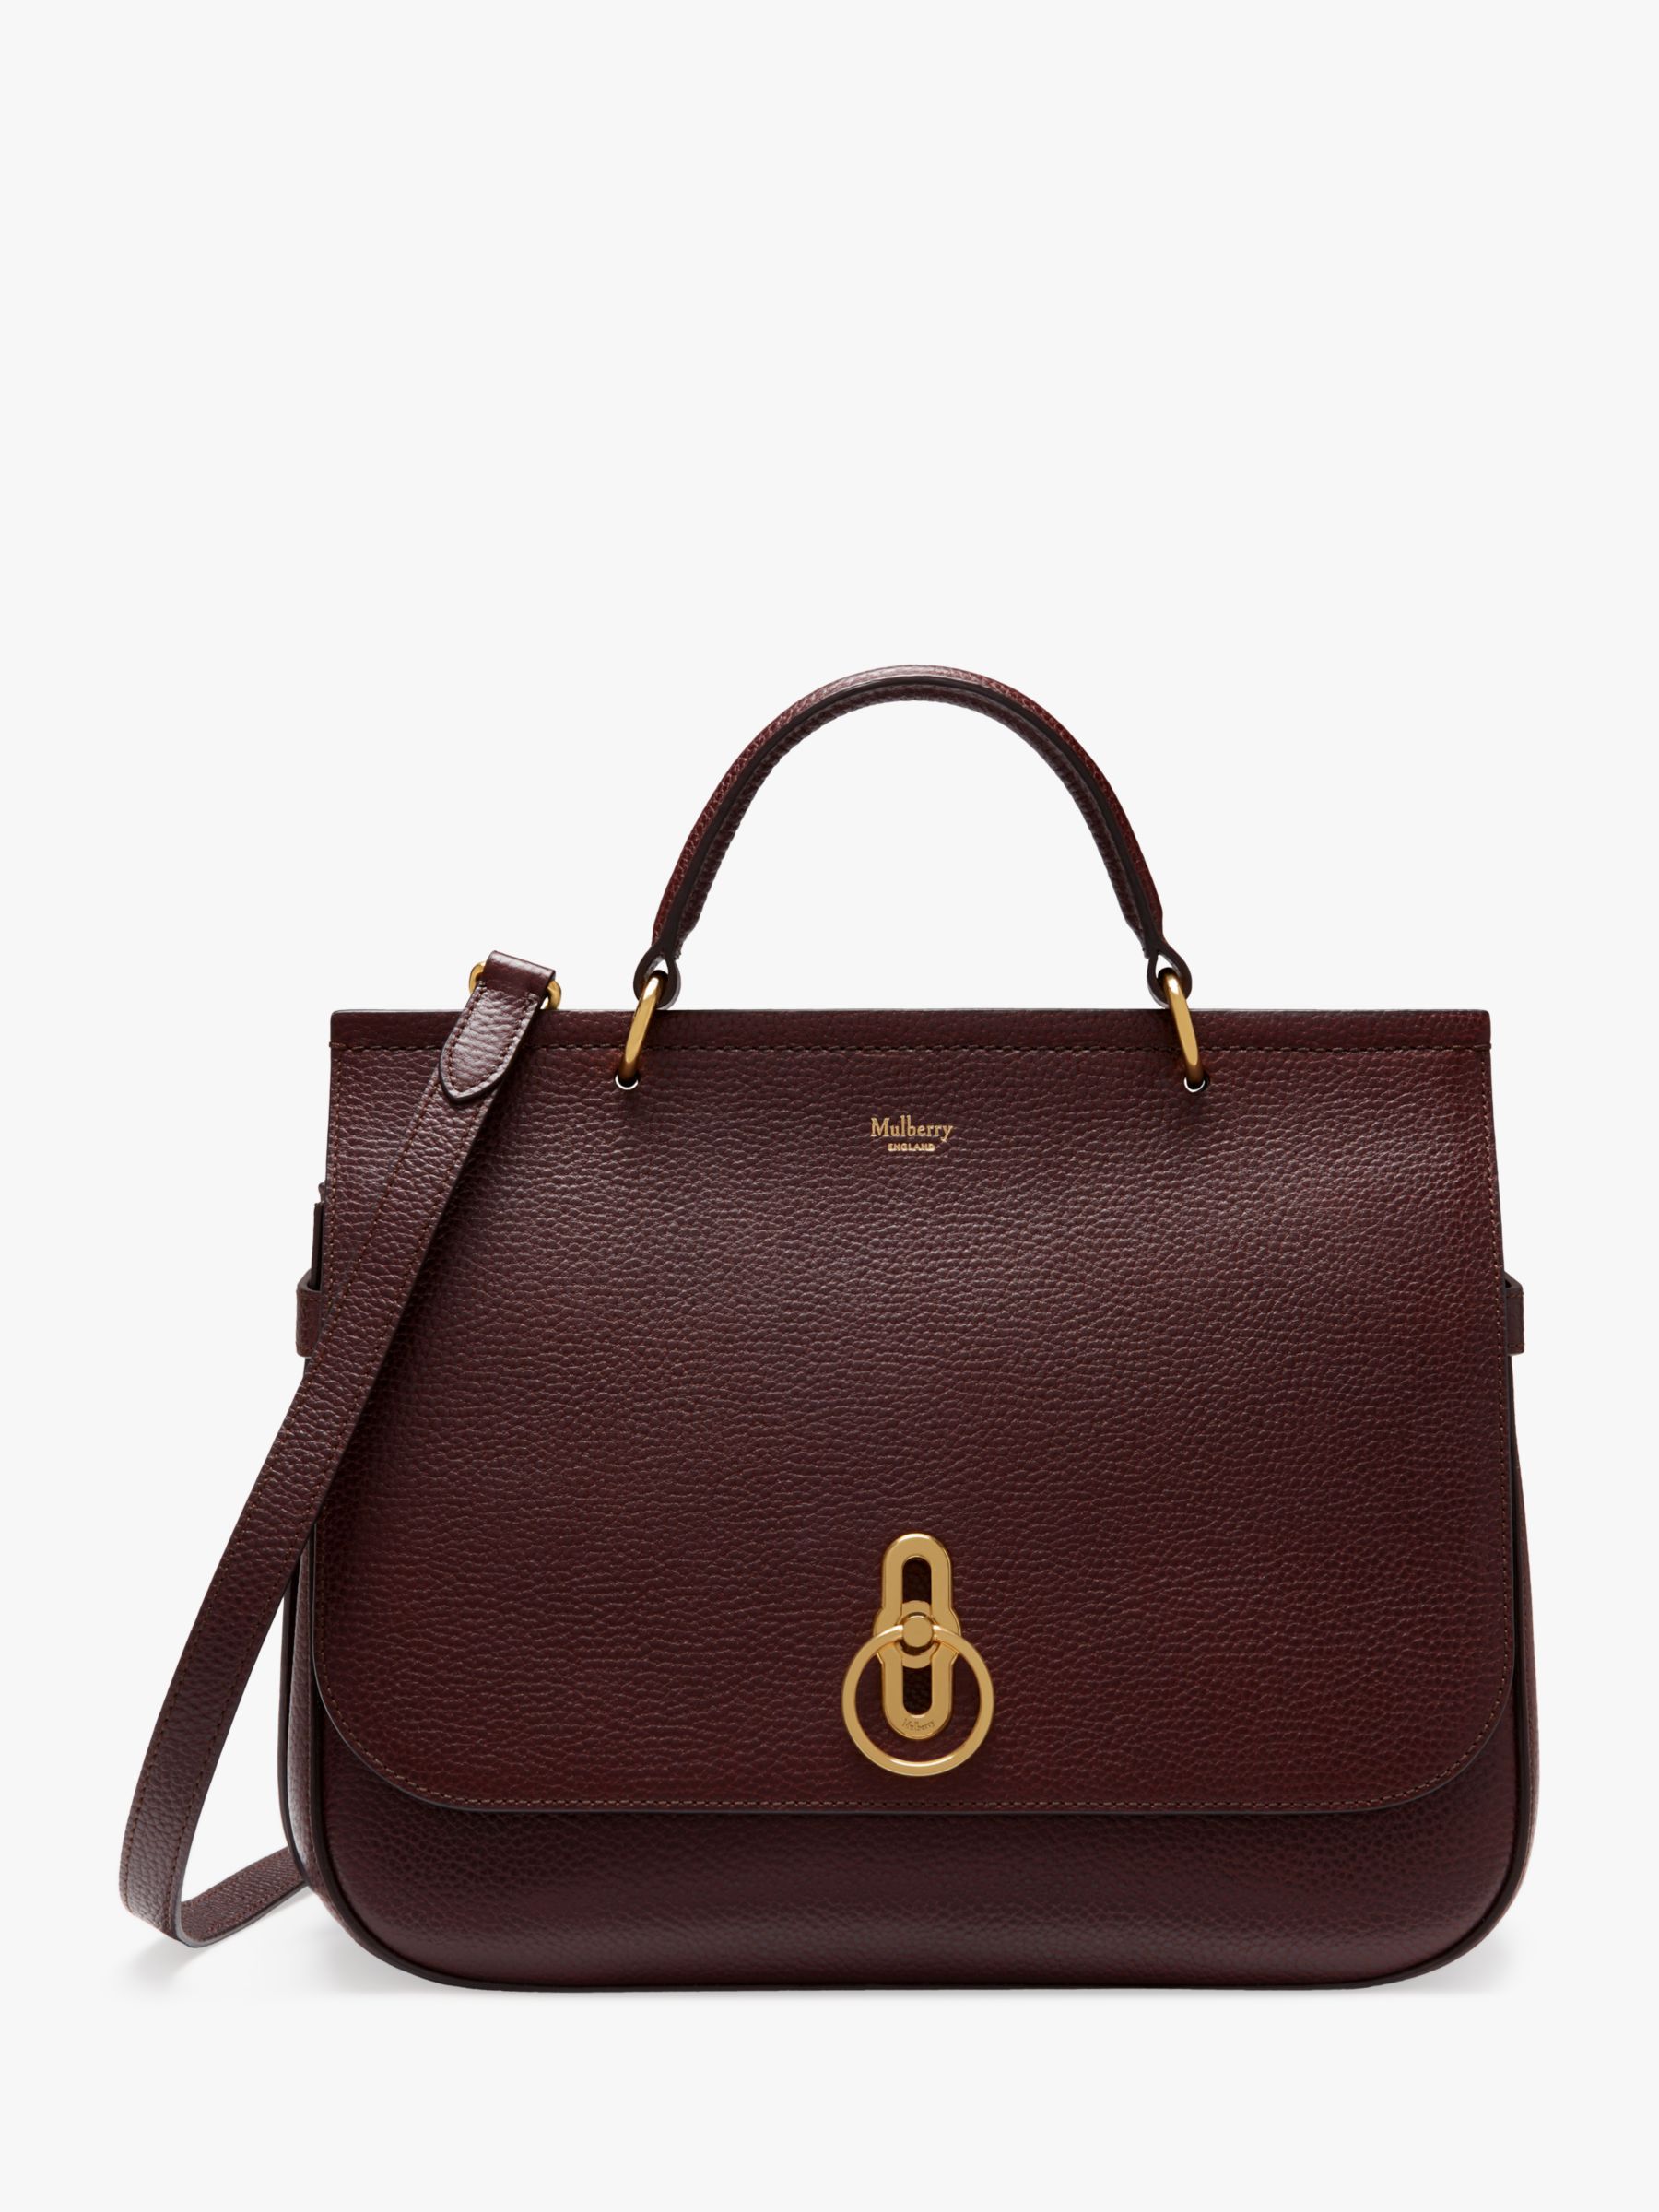 Mulberry Amberley Grain Veg Tanned Leather Satchel Bag at John Lewis ...